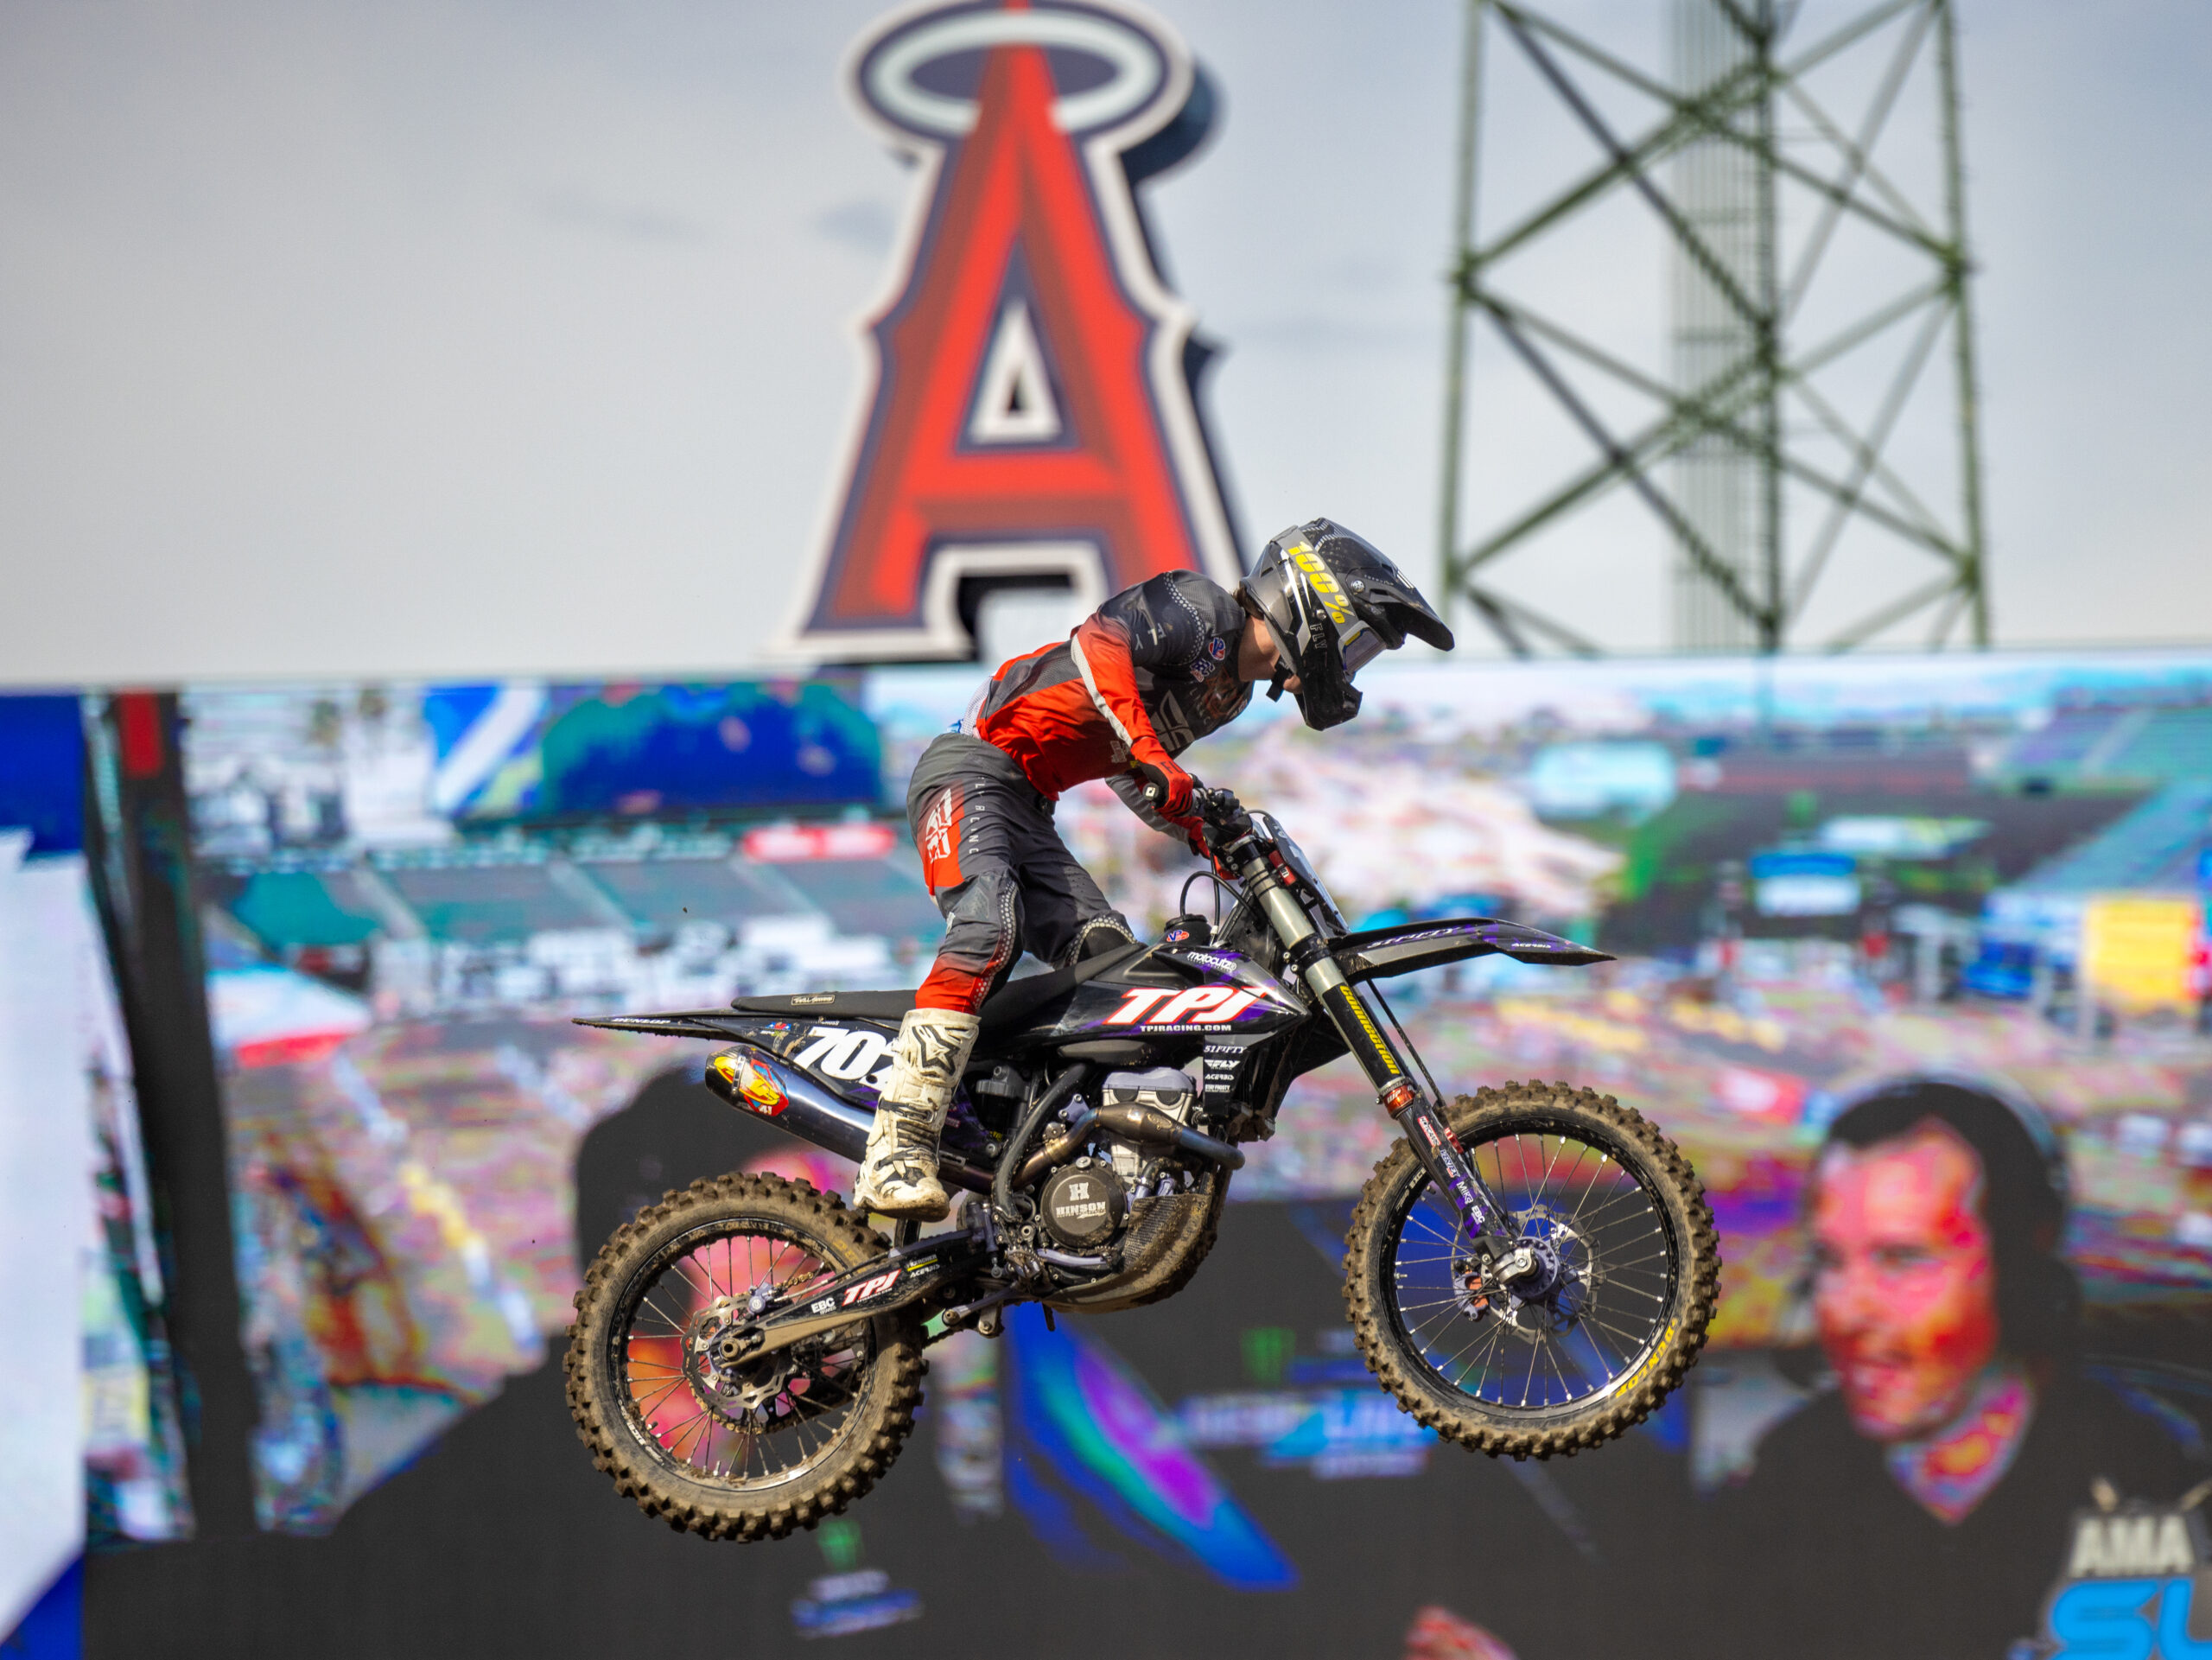 EBC-Equipped TPJ Racing Riders Compete in First 2023 Round of Monster Energy Supercross Championship